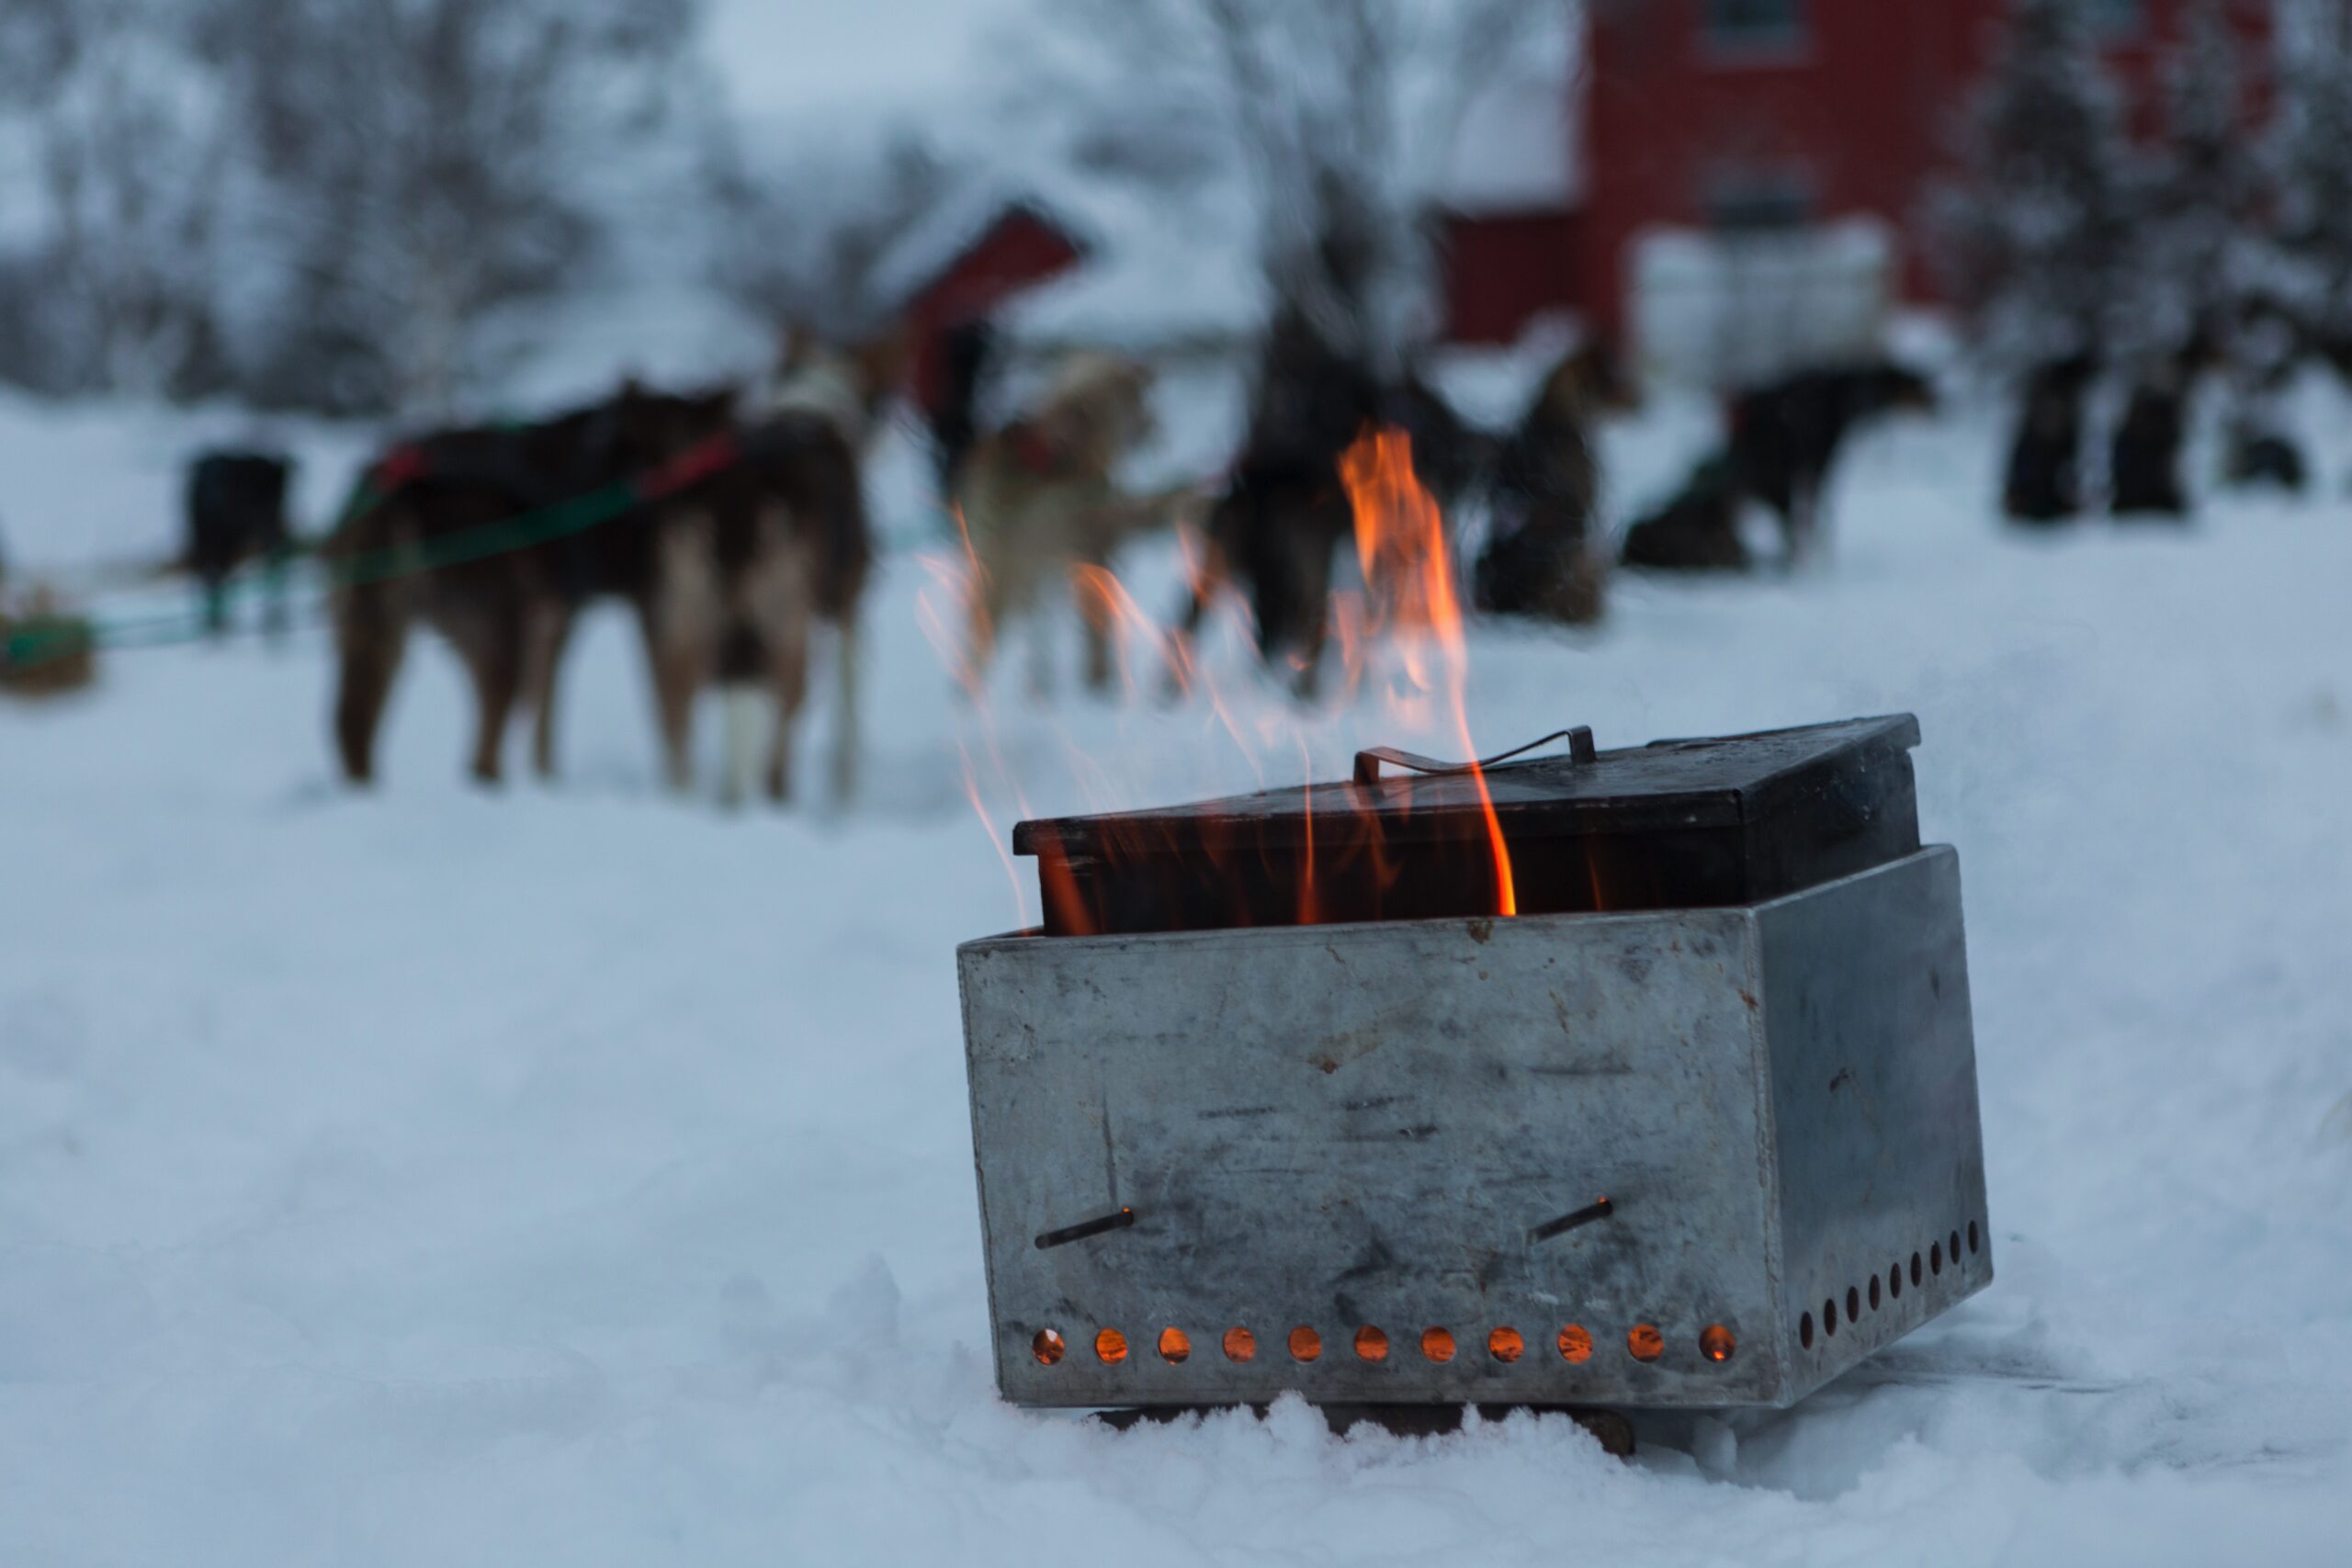 The musher boil the food for the dogs